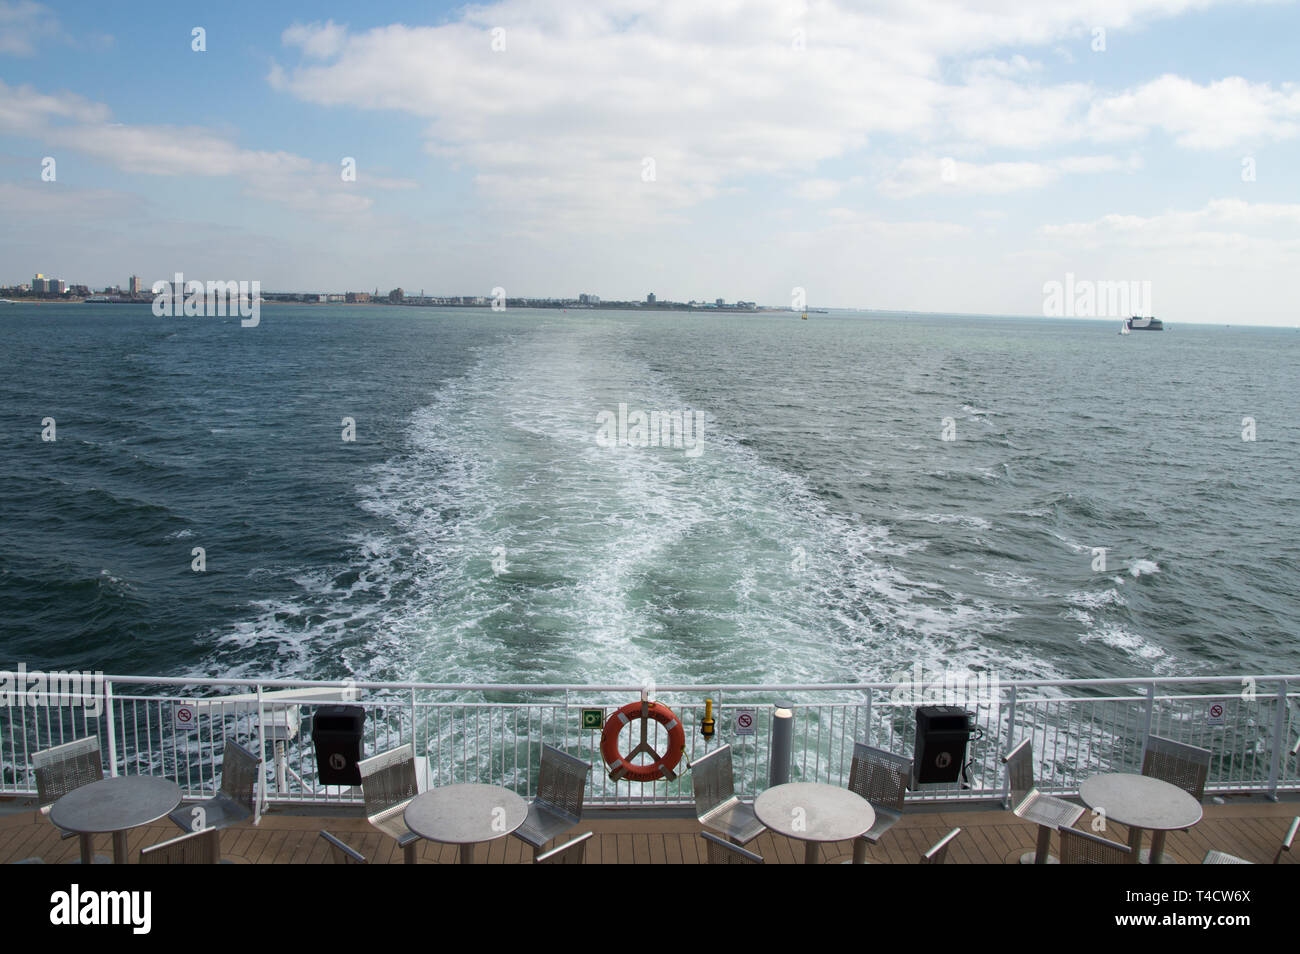 Water trails on Sea at the back of a passenger ferry covering holiday destination Stock Photo